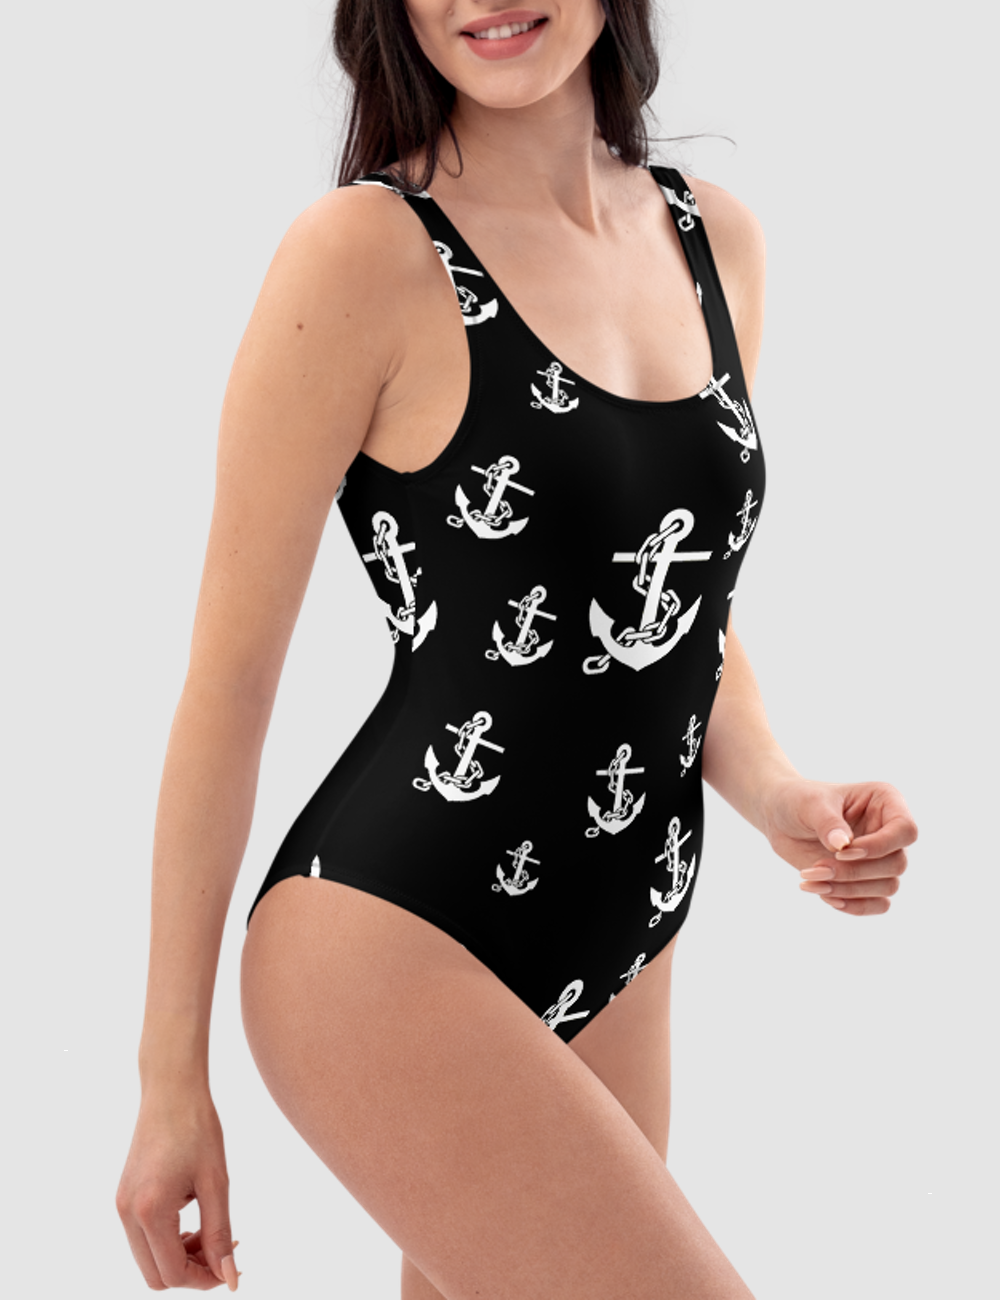 Chained Sea Anchors | Women's One-Piece Swimsuit OniTakai